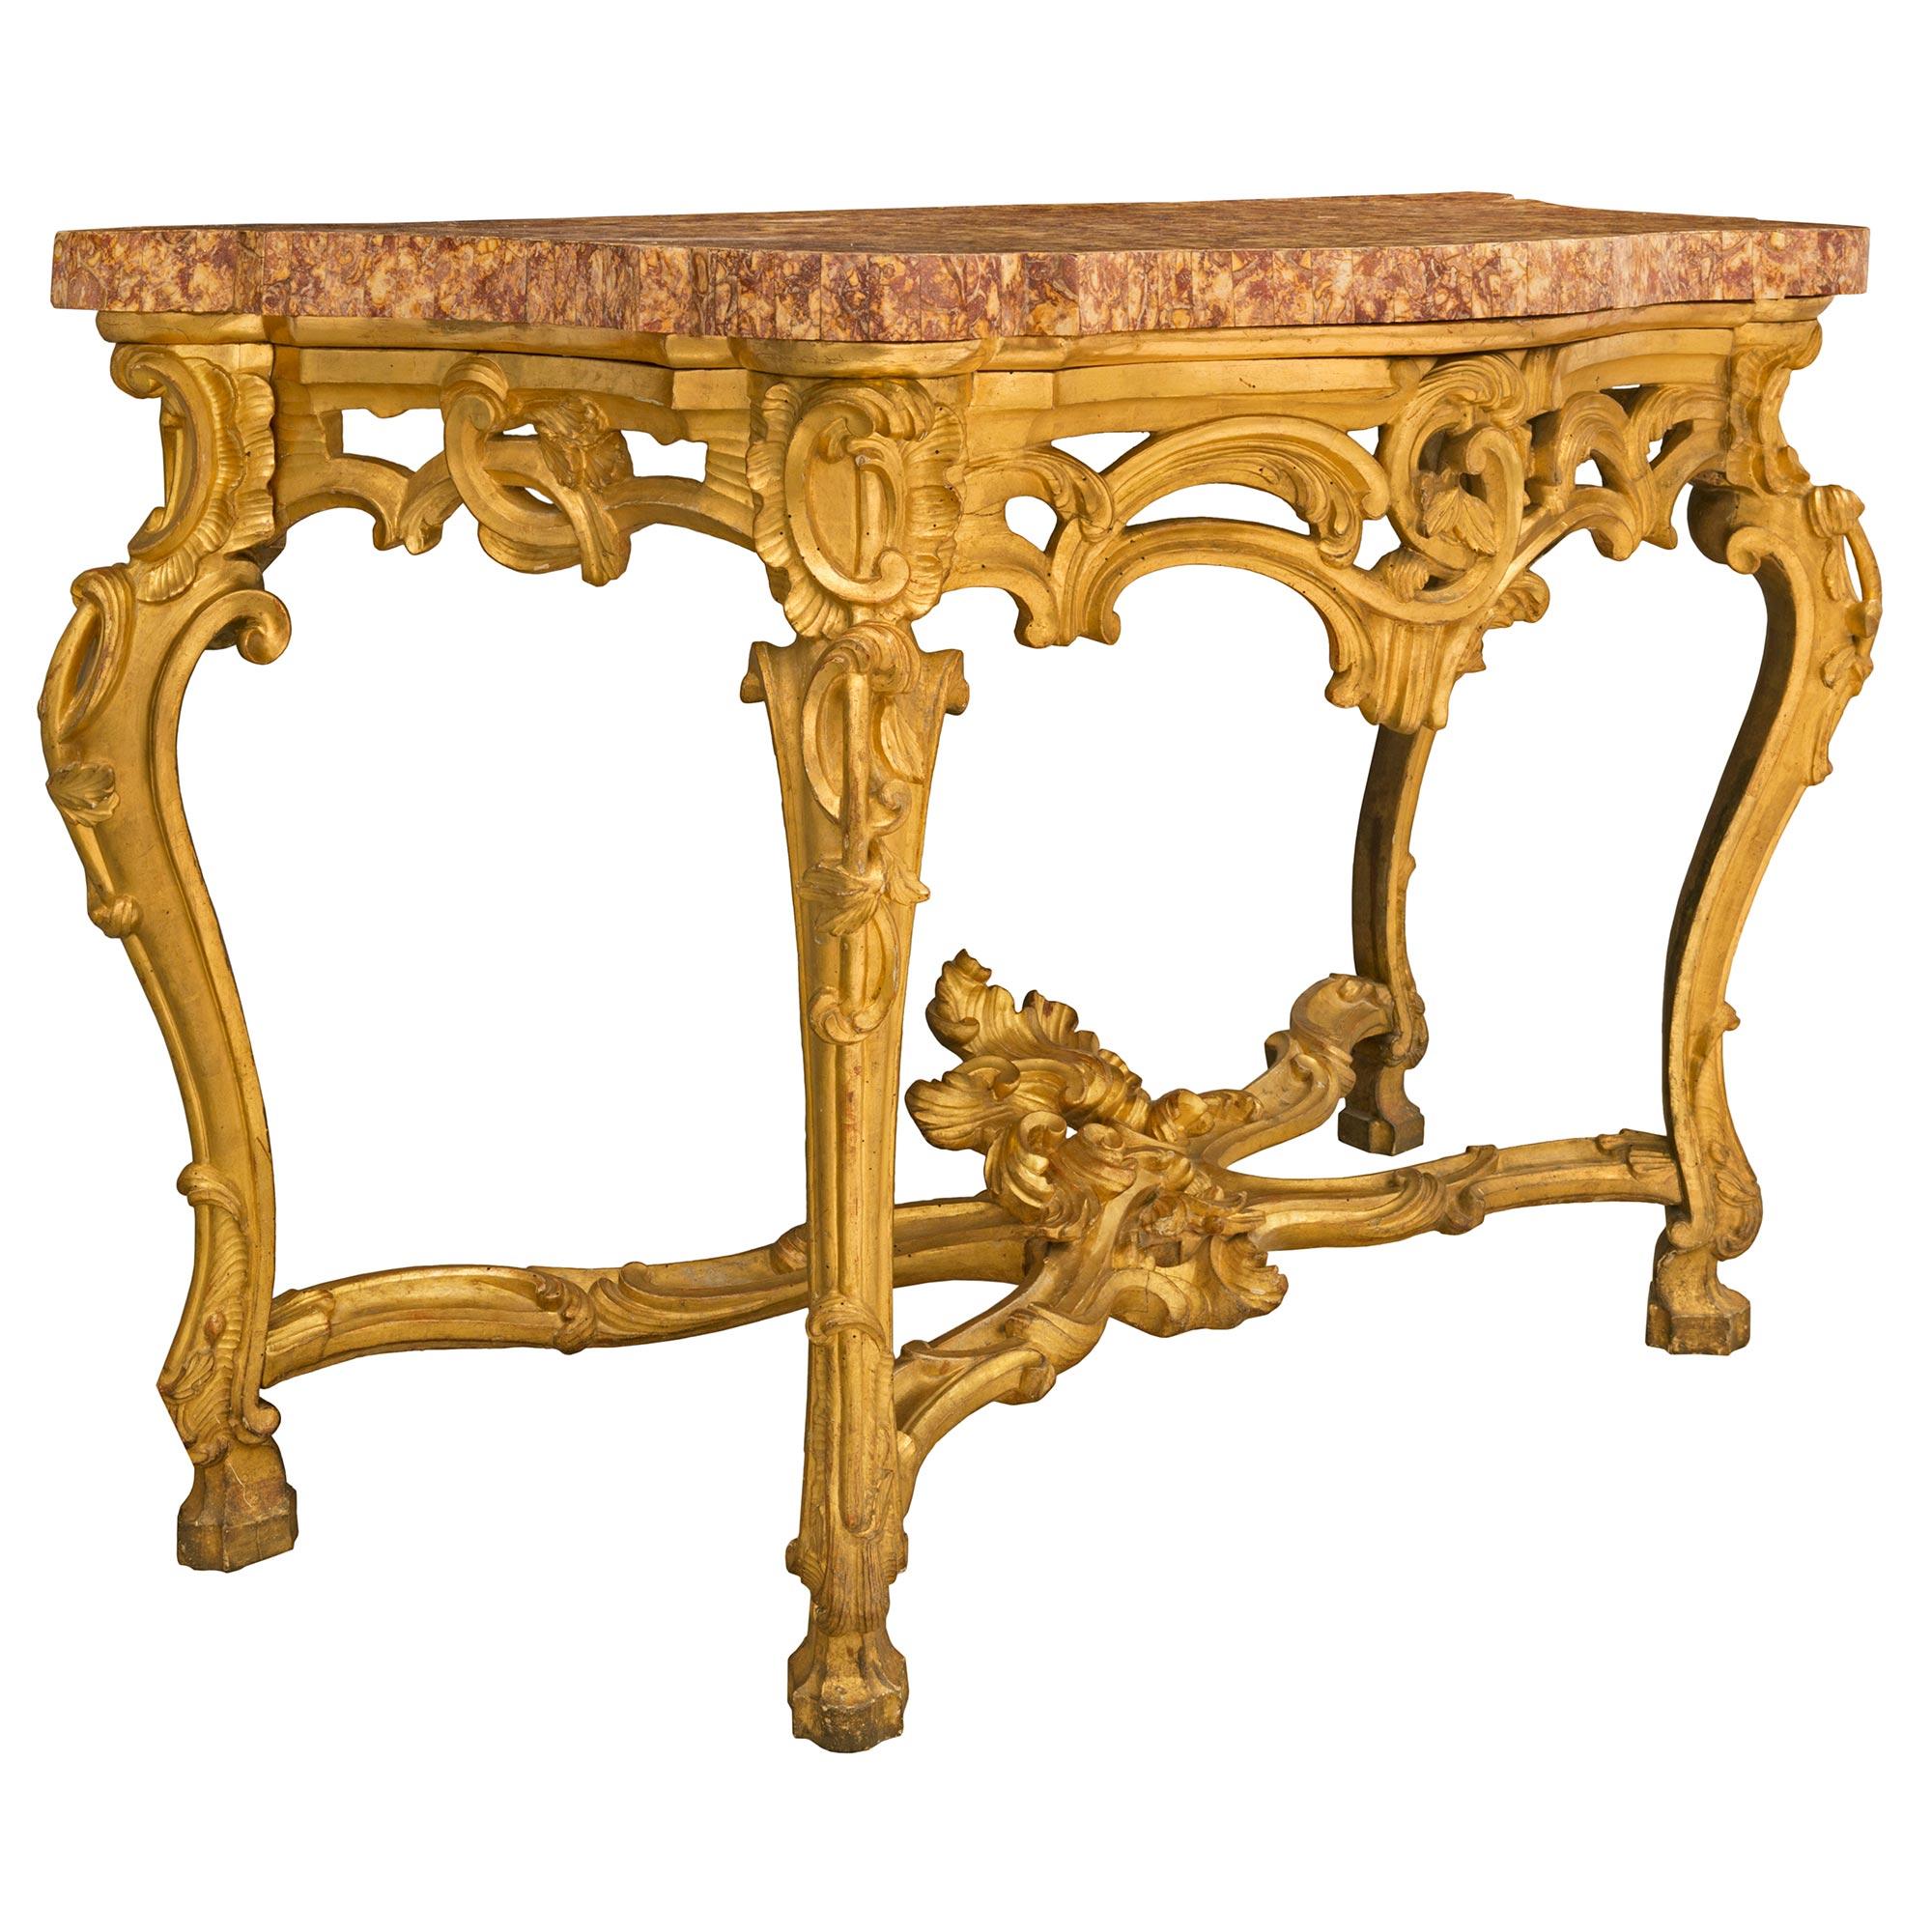 Pair of Italian Mid-18th Century Louis XV Period Giltwood Consoles In Good Condition For Sale In West Palm Beach, FL